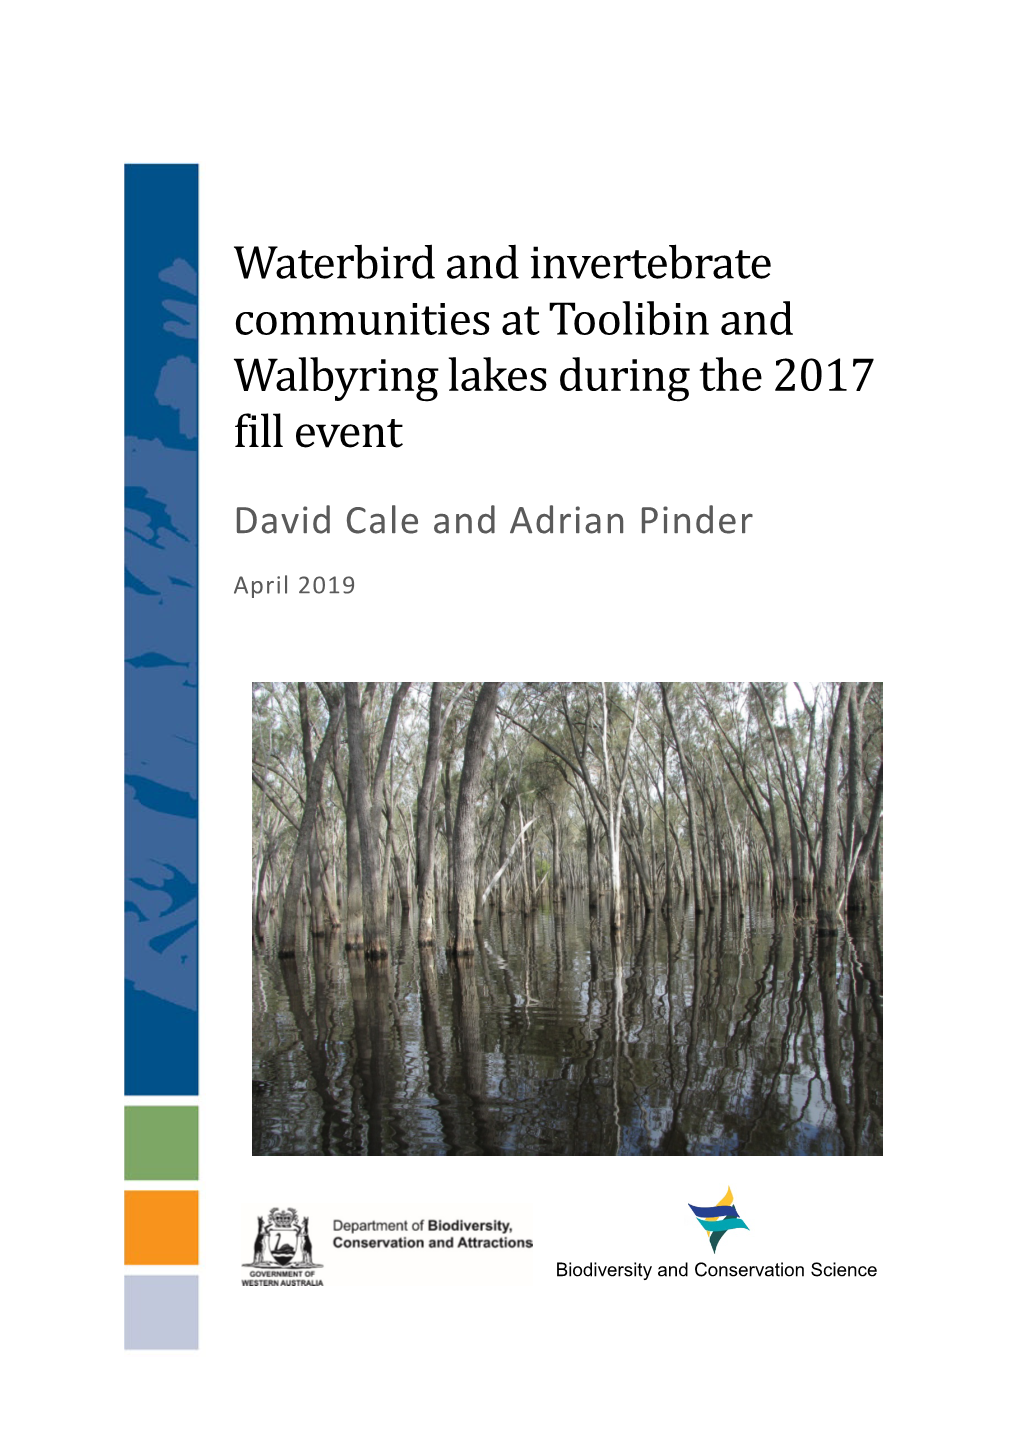 Waterbird and Invertebrate Communities at Toolibin and Walbyring Lakes During the 2017 Fill Event